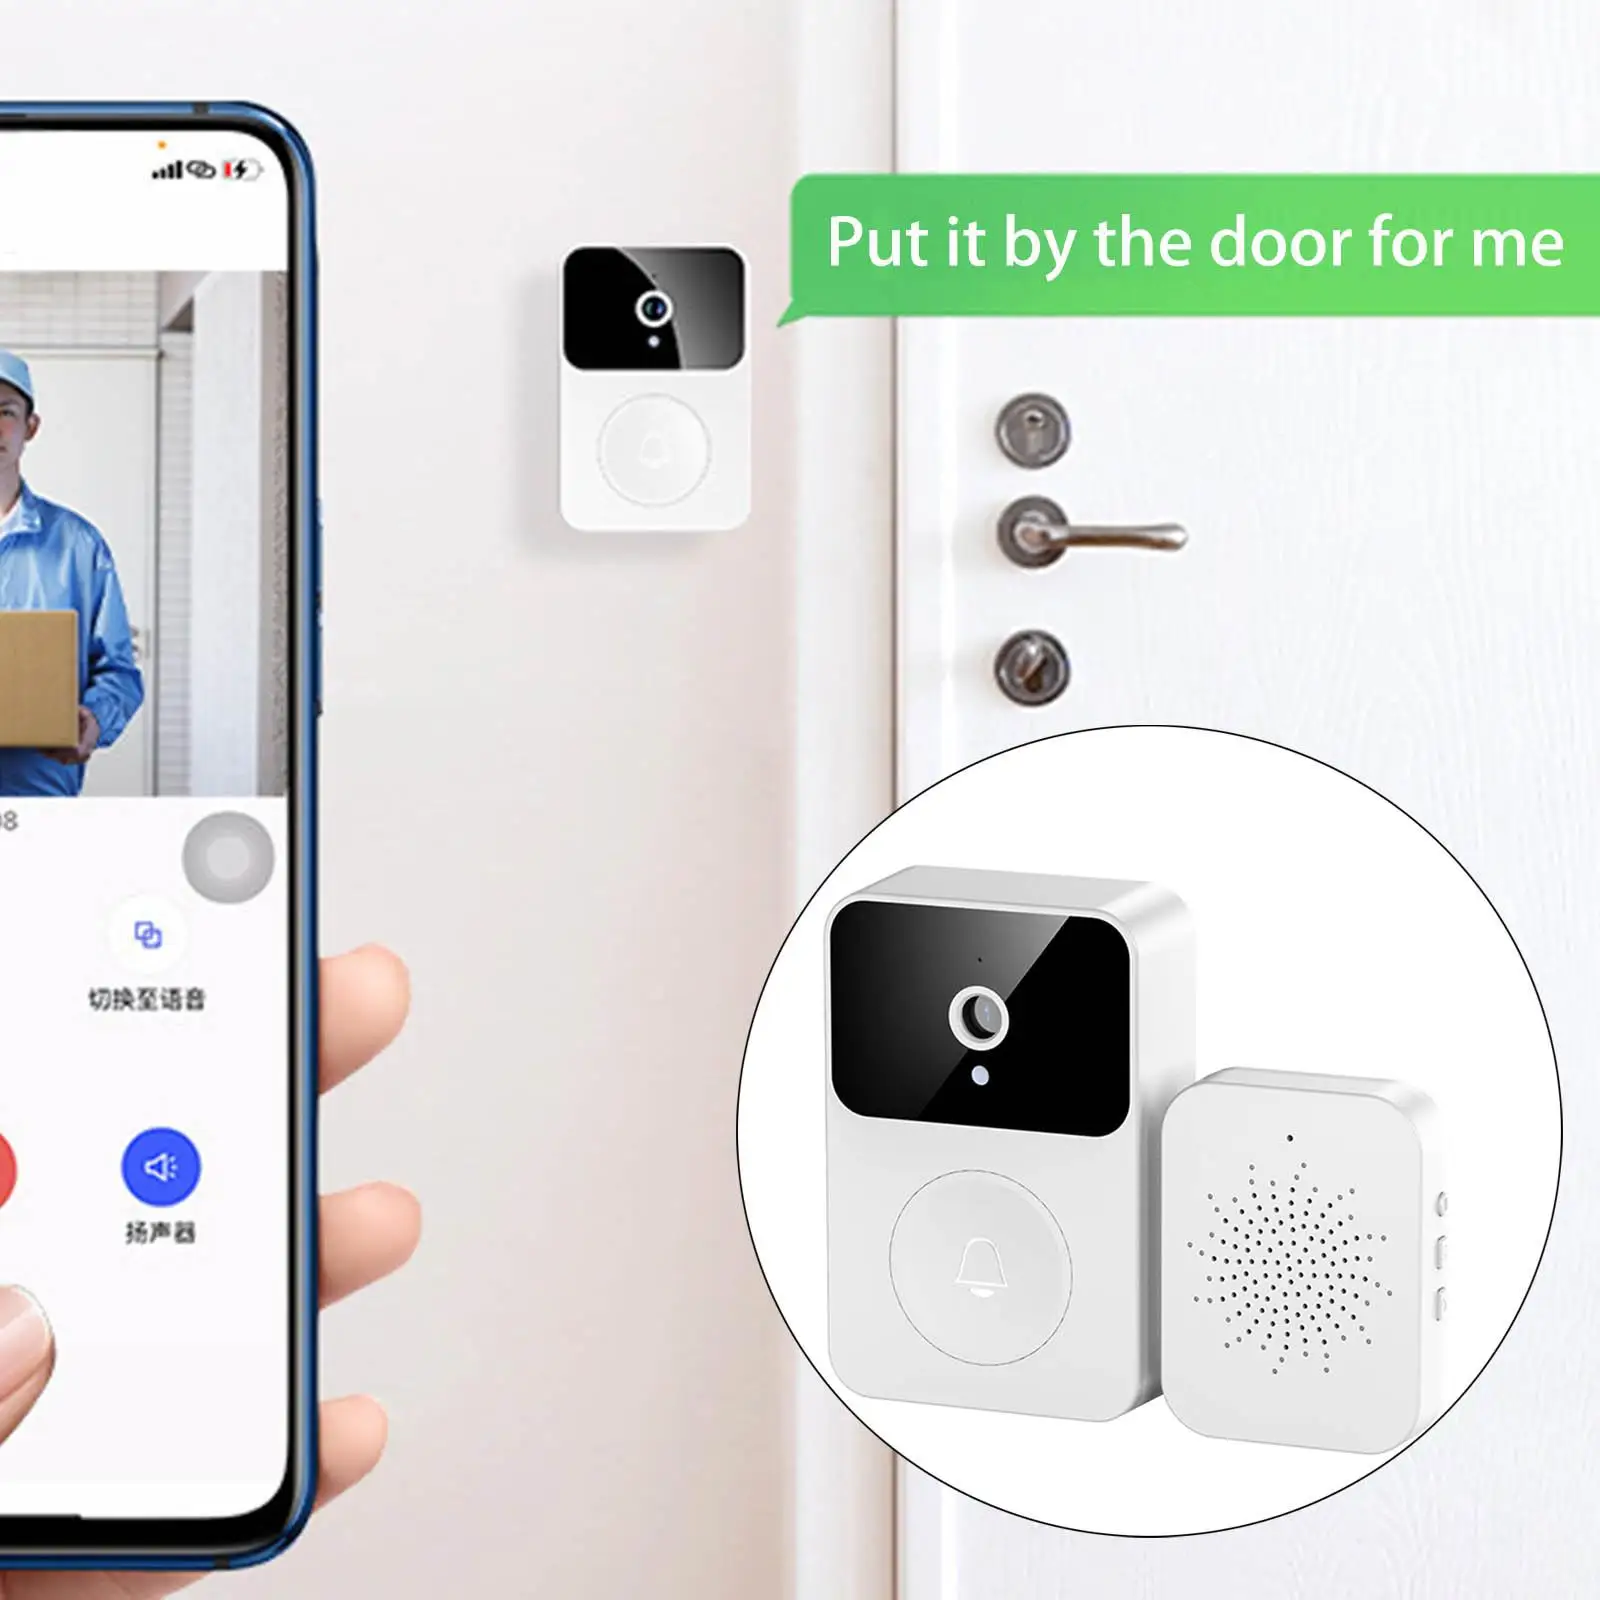 Smart Wireless Remote Video Doorbell Can Two Way Calls,Photo,App Control Home Intercom for Storehouse